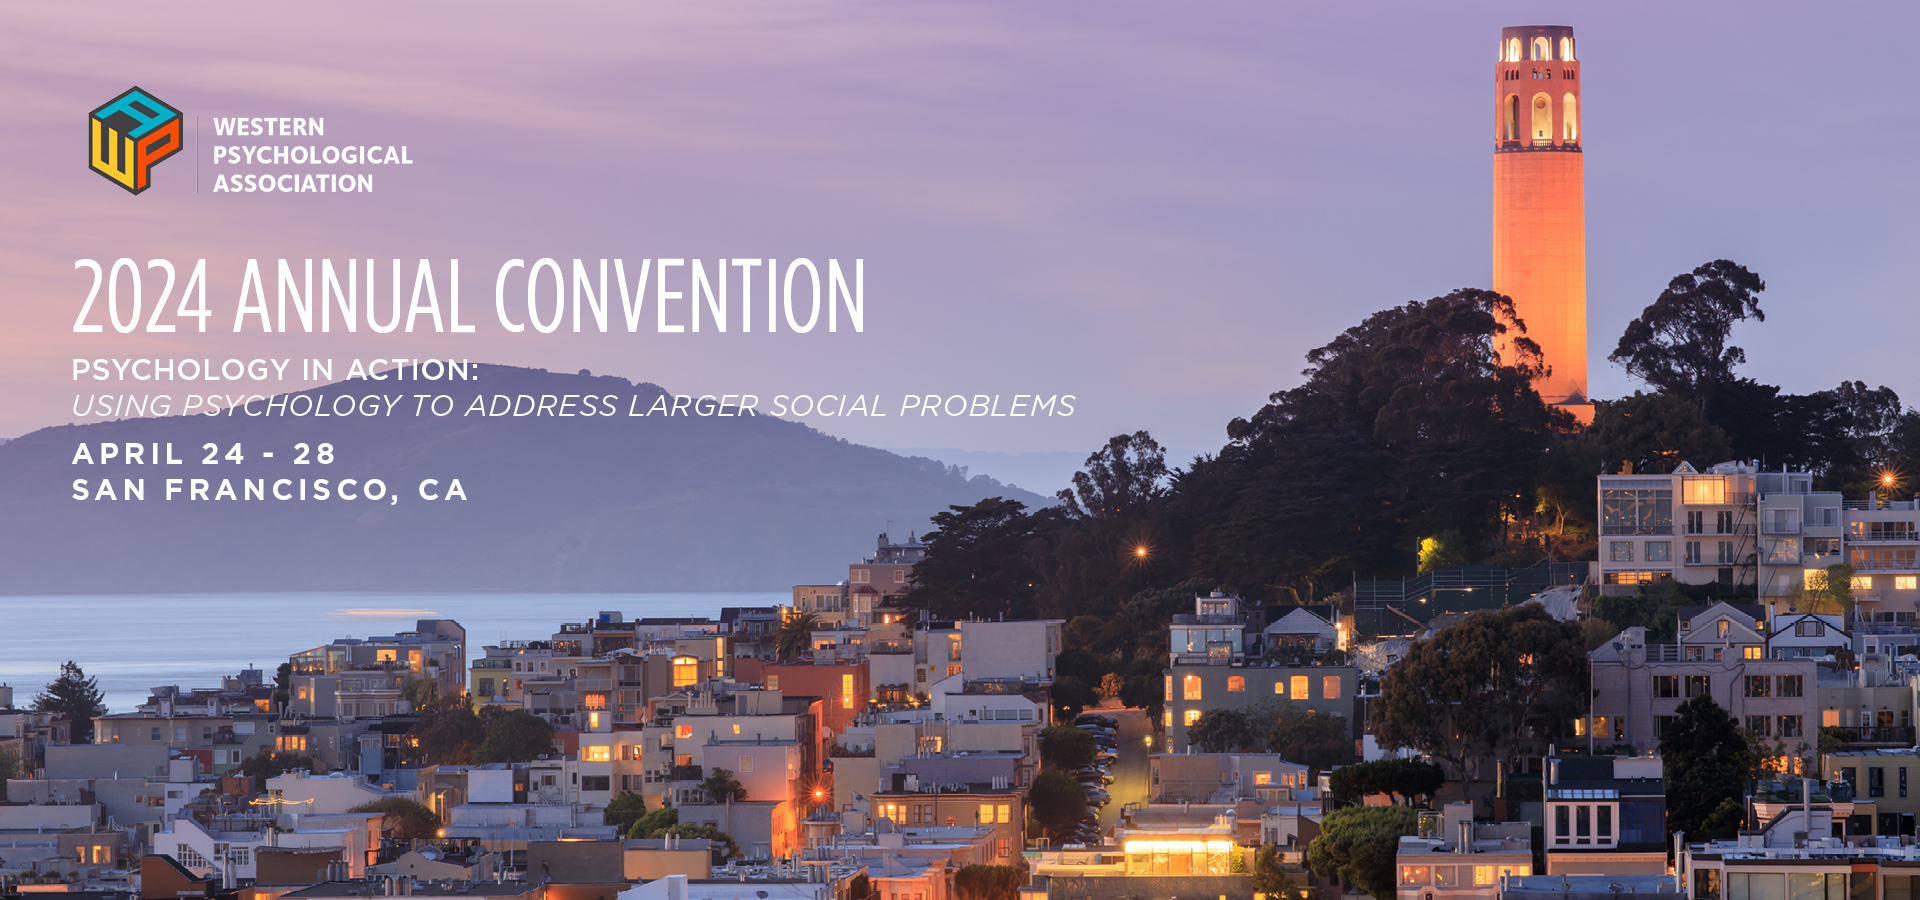 San Fransico conference for 2024 scenic photo of the city